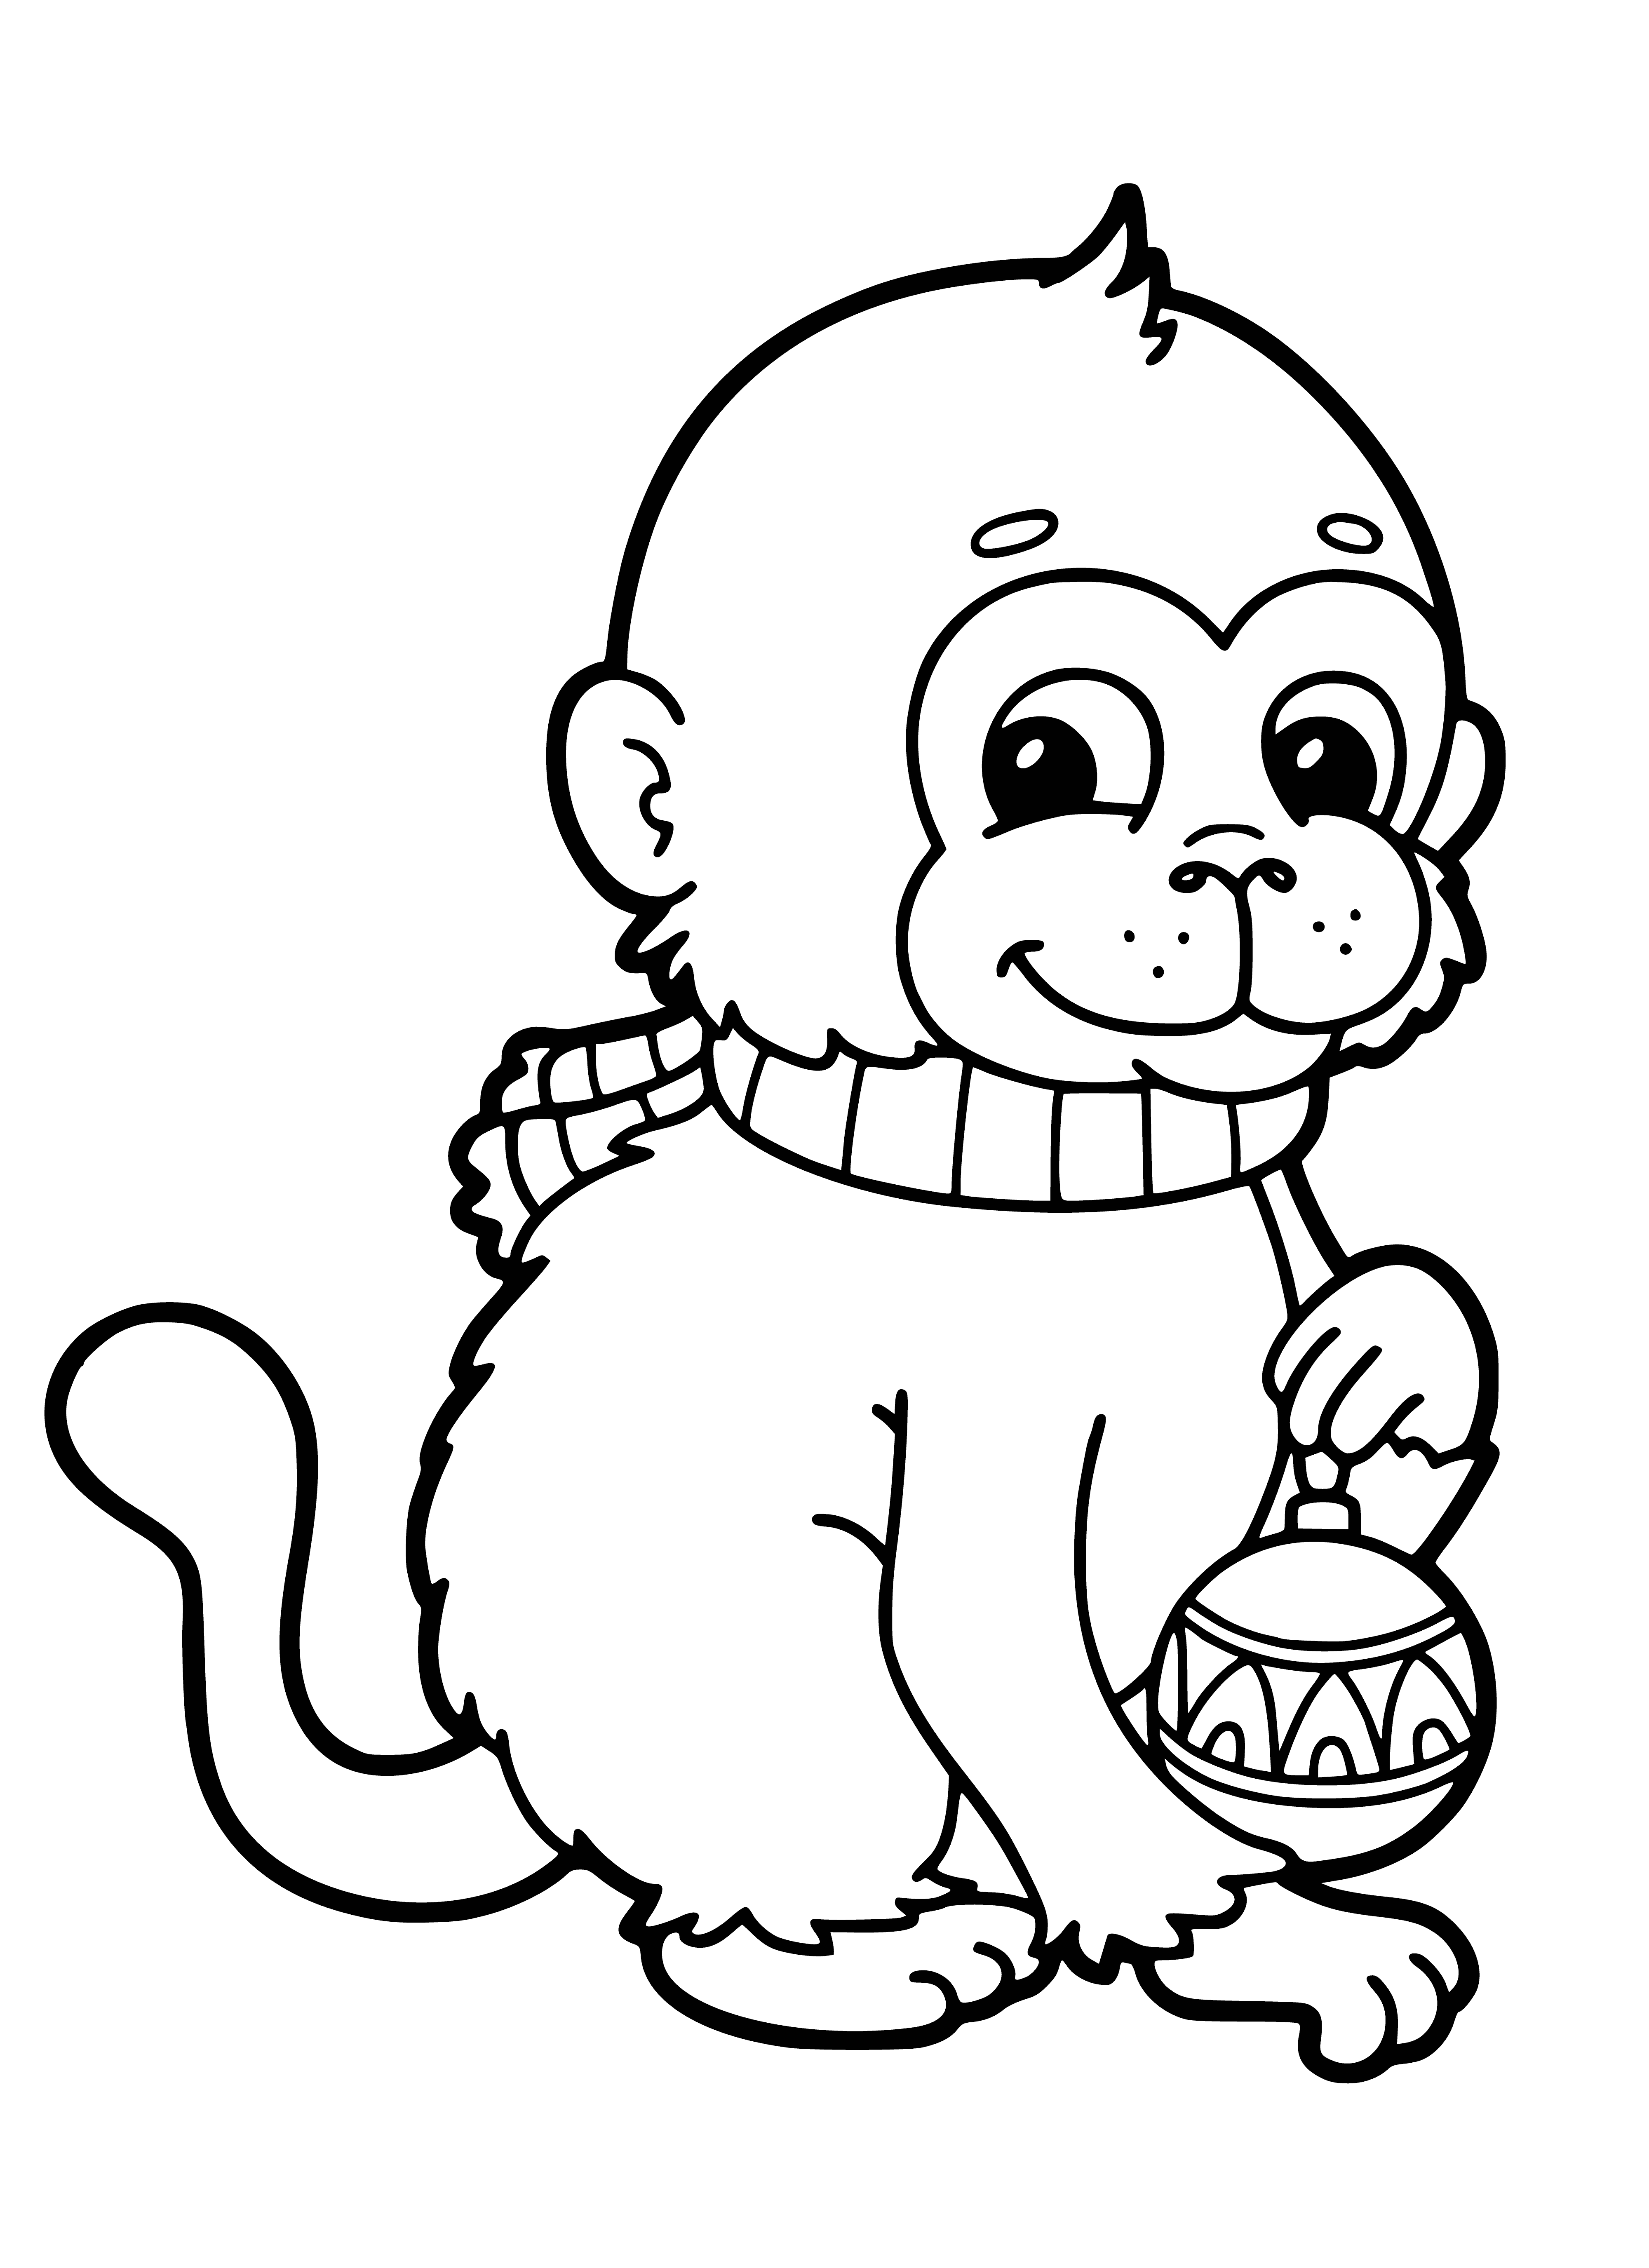 coloring page: Monkey on a tree branch reaches out for a christmas ball in a coloring page. #ChristmasHoliday